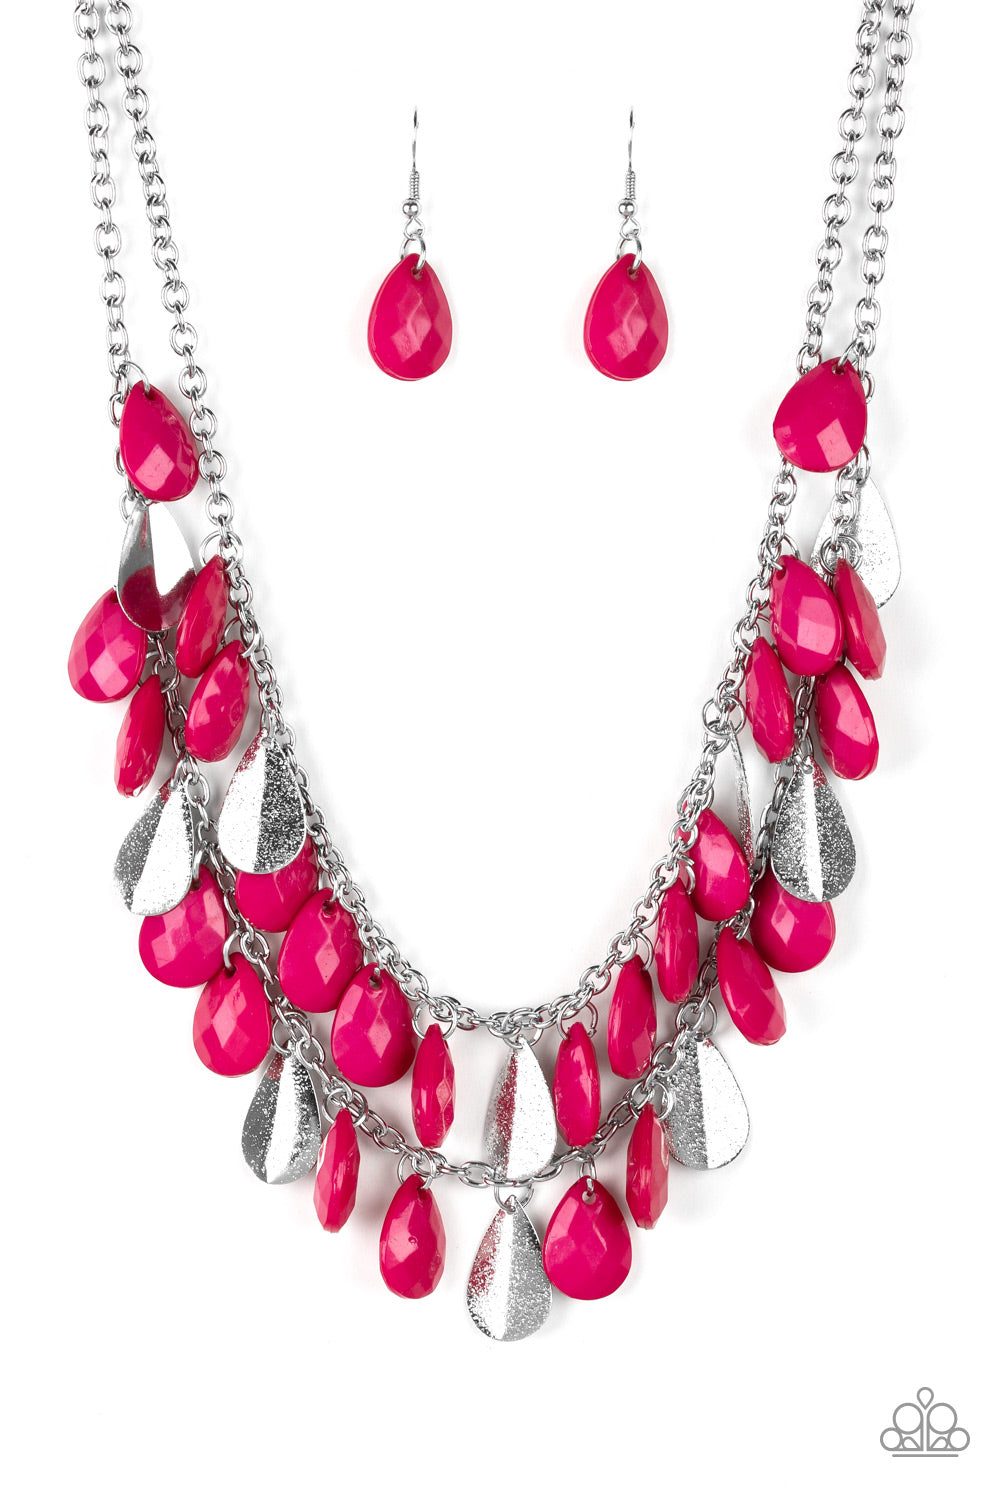 Life of the FIESTA Pink Paparazzi Necklaces Cashmere Pink Jewels - Cashmere Pink Jewels & Accessories, Cashmere Pink Jewels & Accessories - Paparazzi